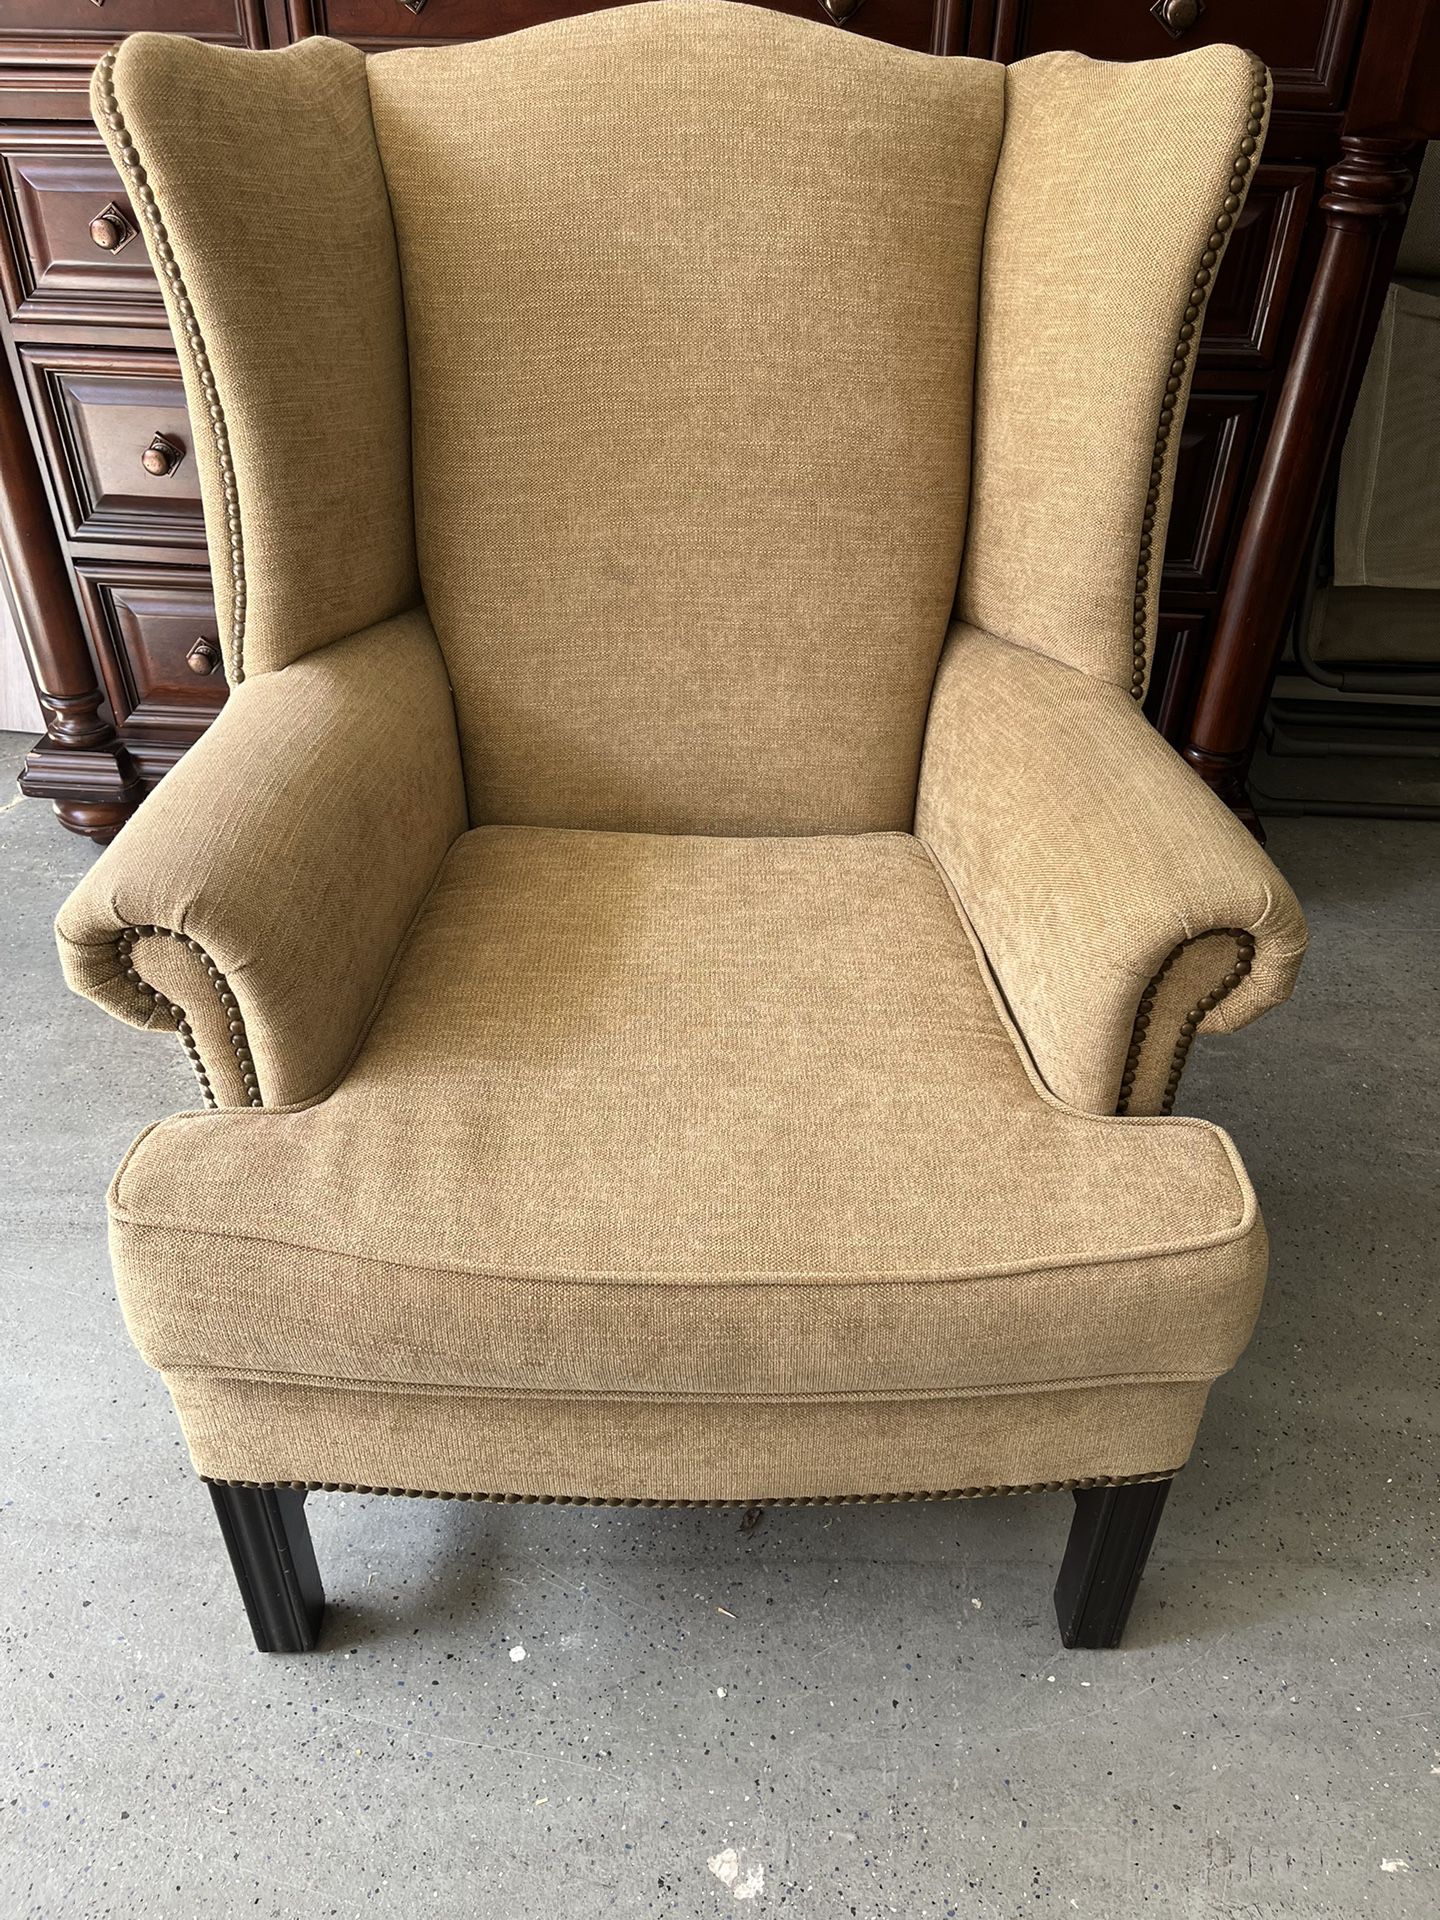 Upholstered Wingback Chair Pottery Barn 